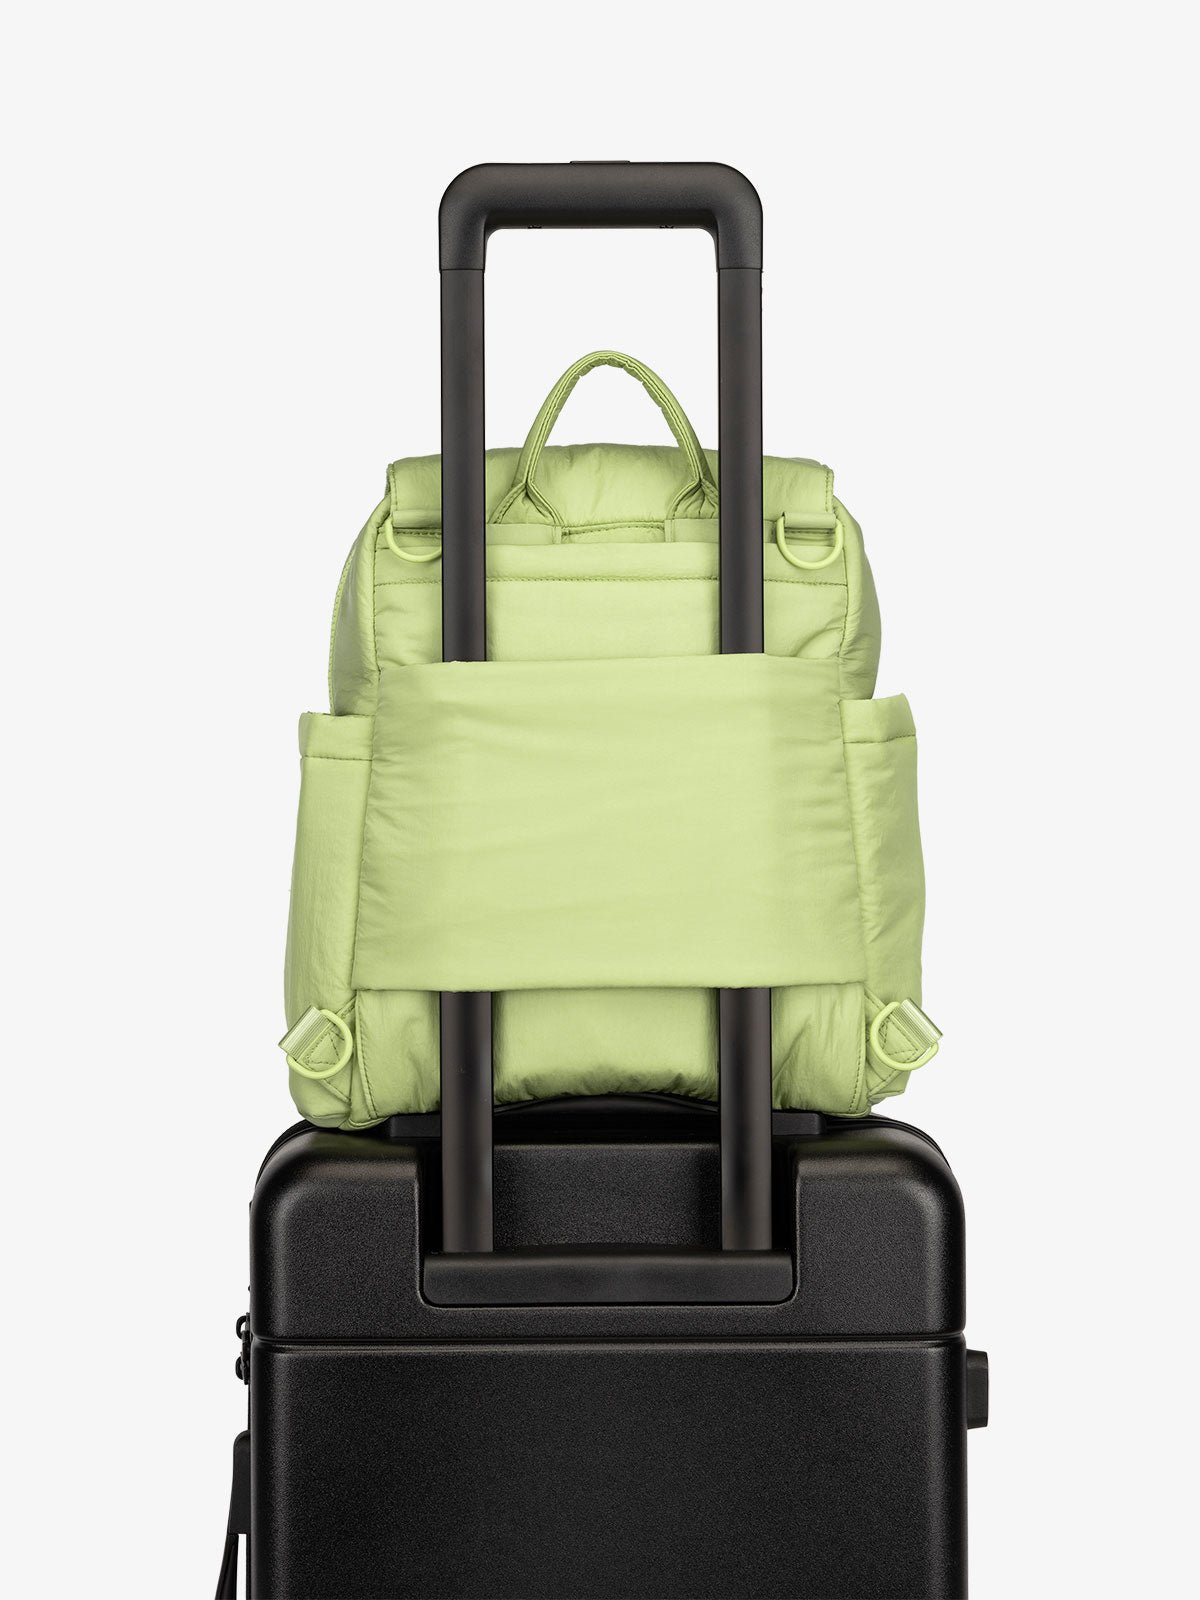 Lime CALPAK Convertible Mini Diaper Backpack with luggage trolley sleeve, transport handle, and D-ring attachments